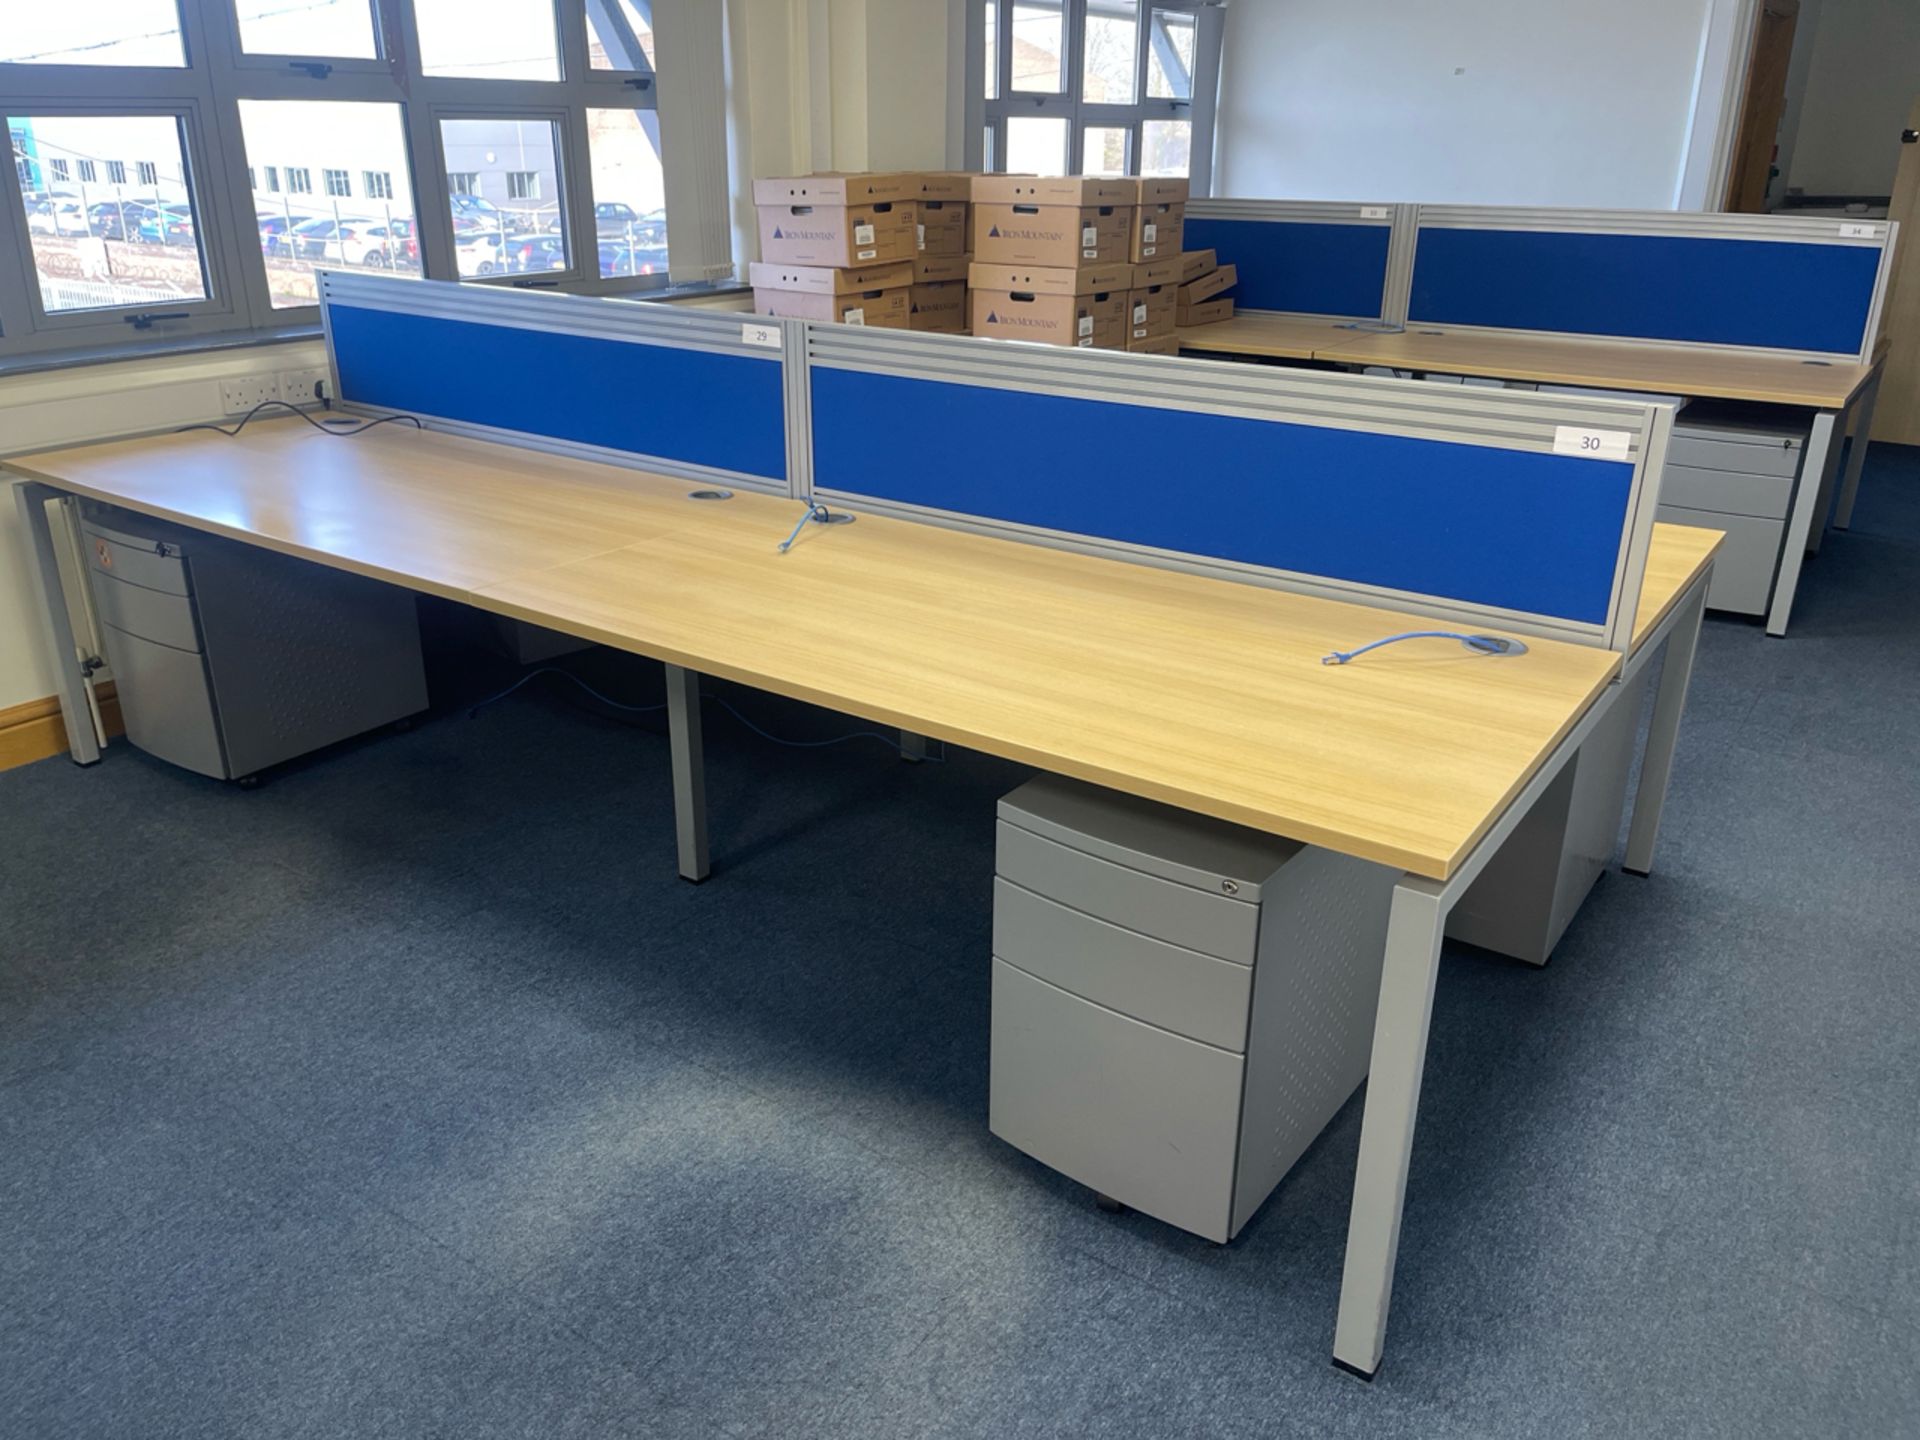 ref 109 - Bank Of 4 Desks With Privacy Dividers & Chairs